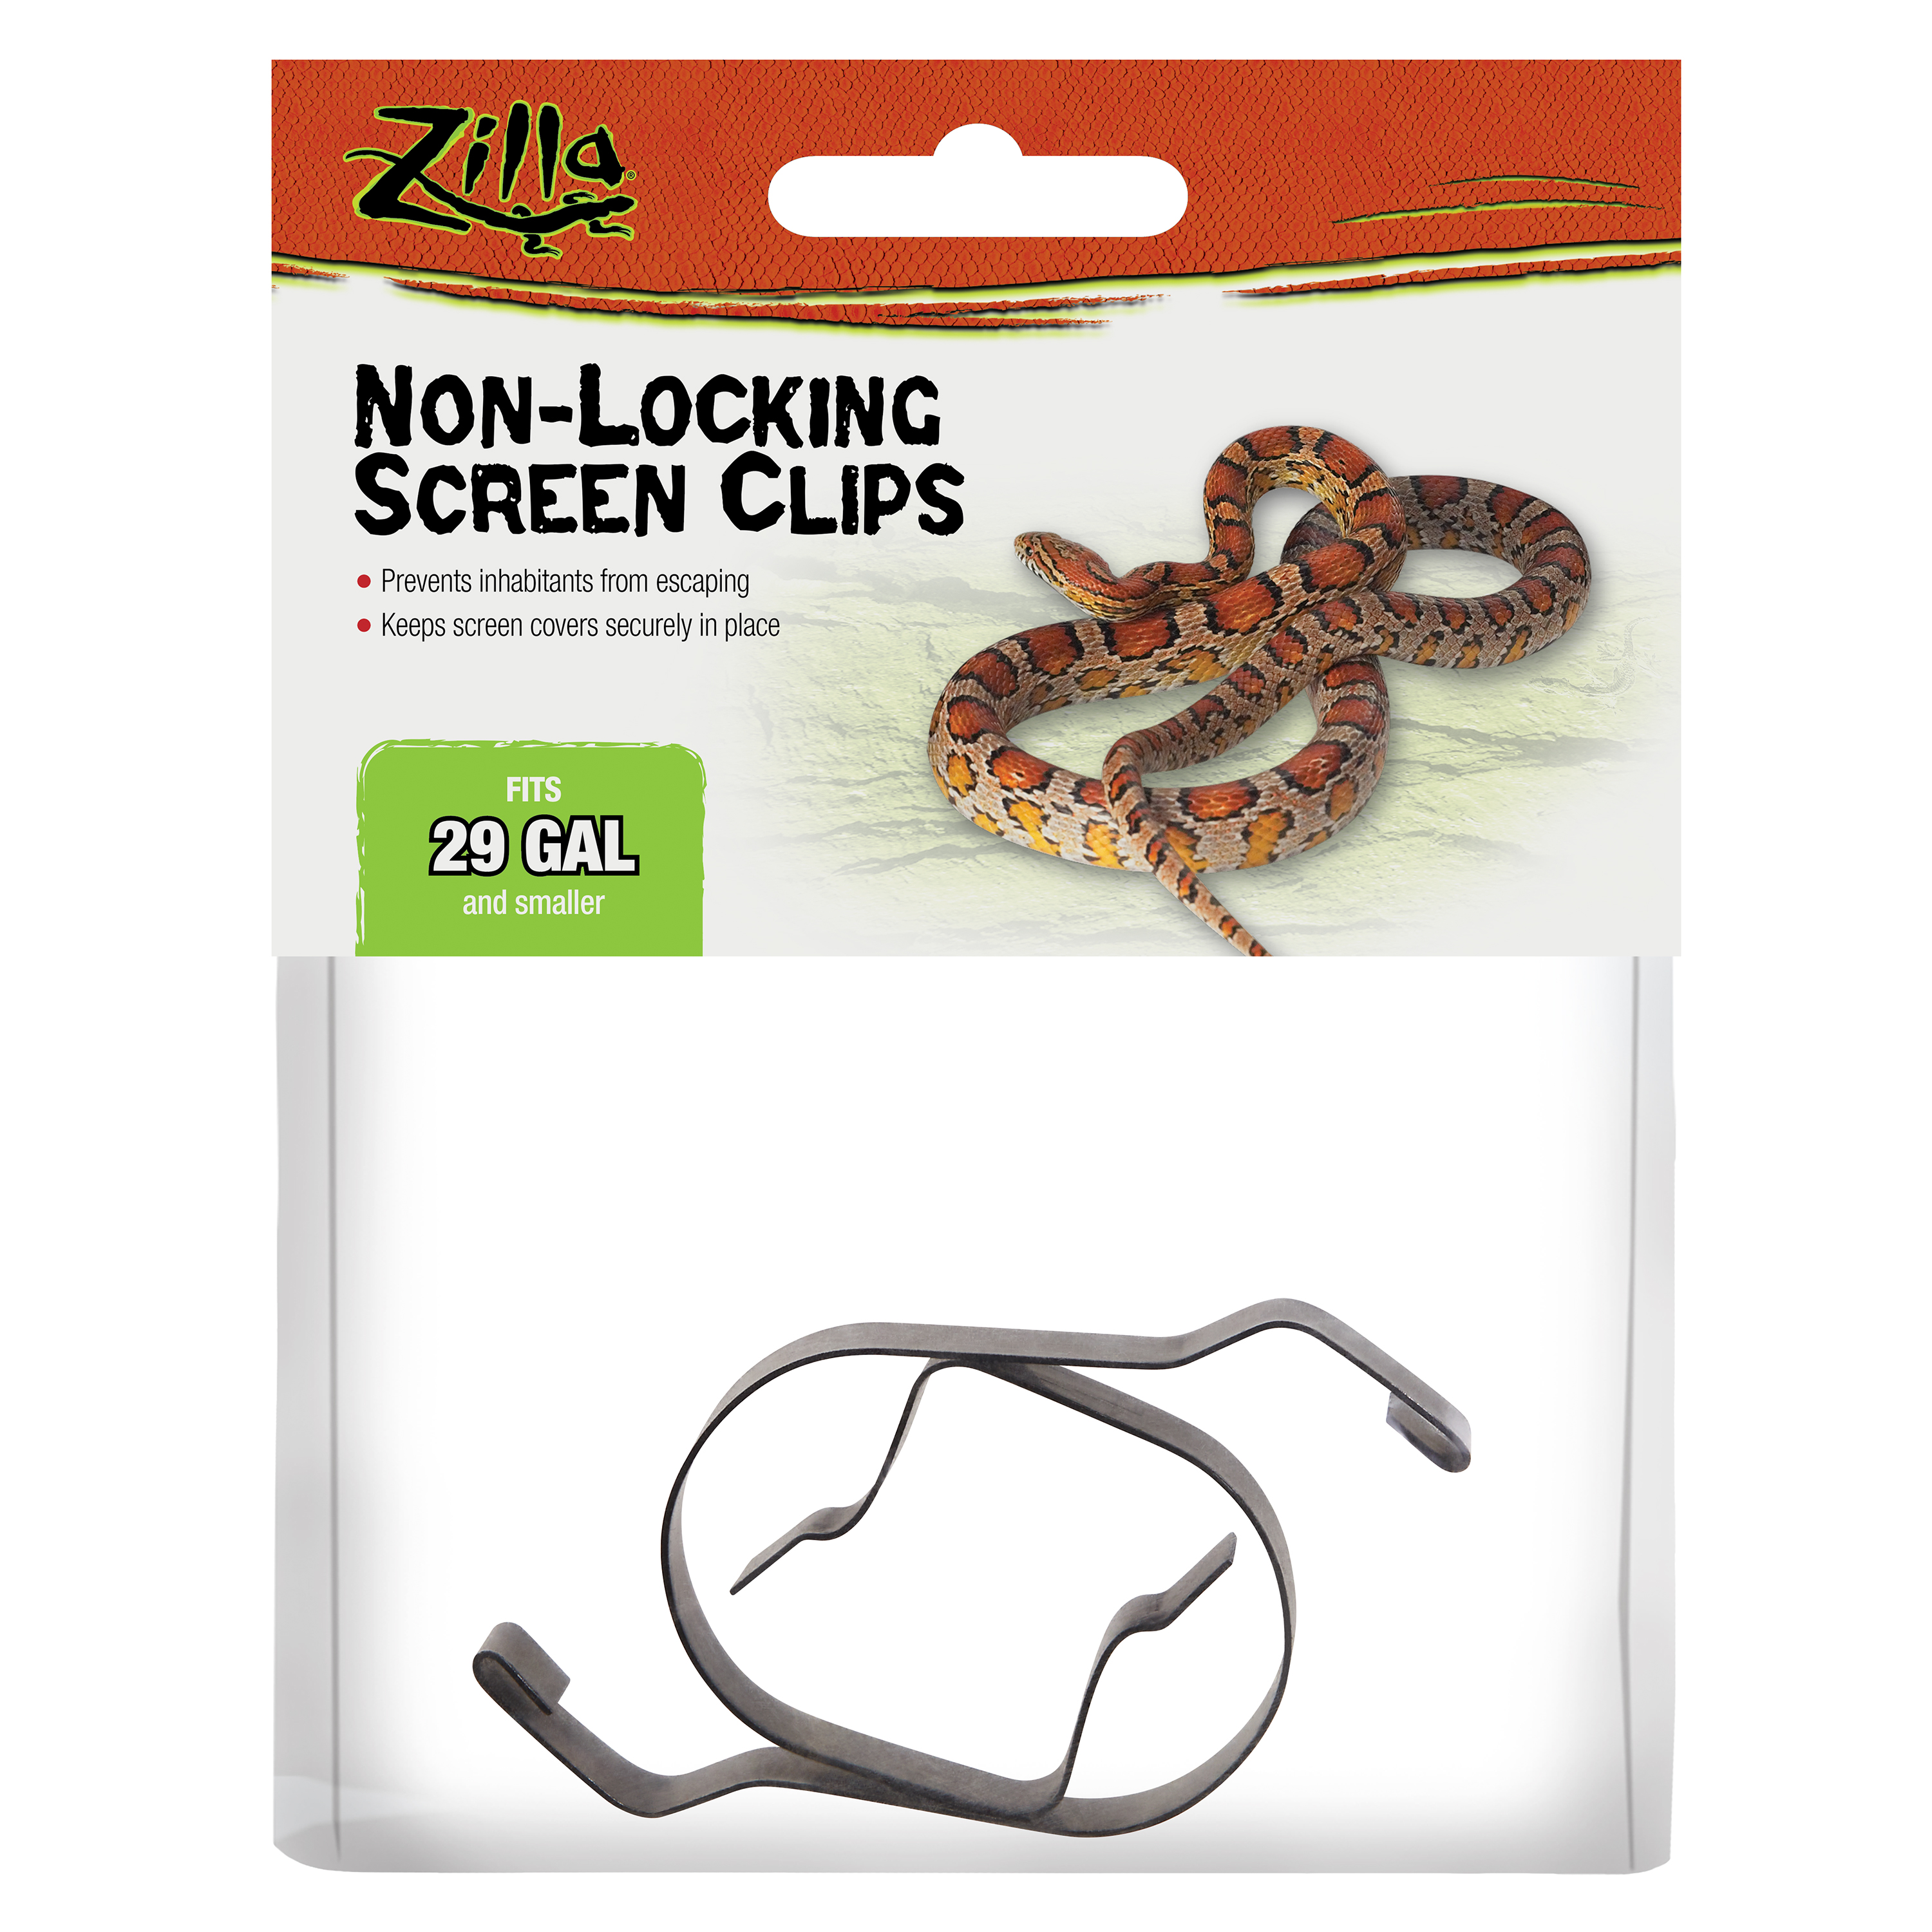 Zilla Non-Locking Screen Clips in Packaging